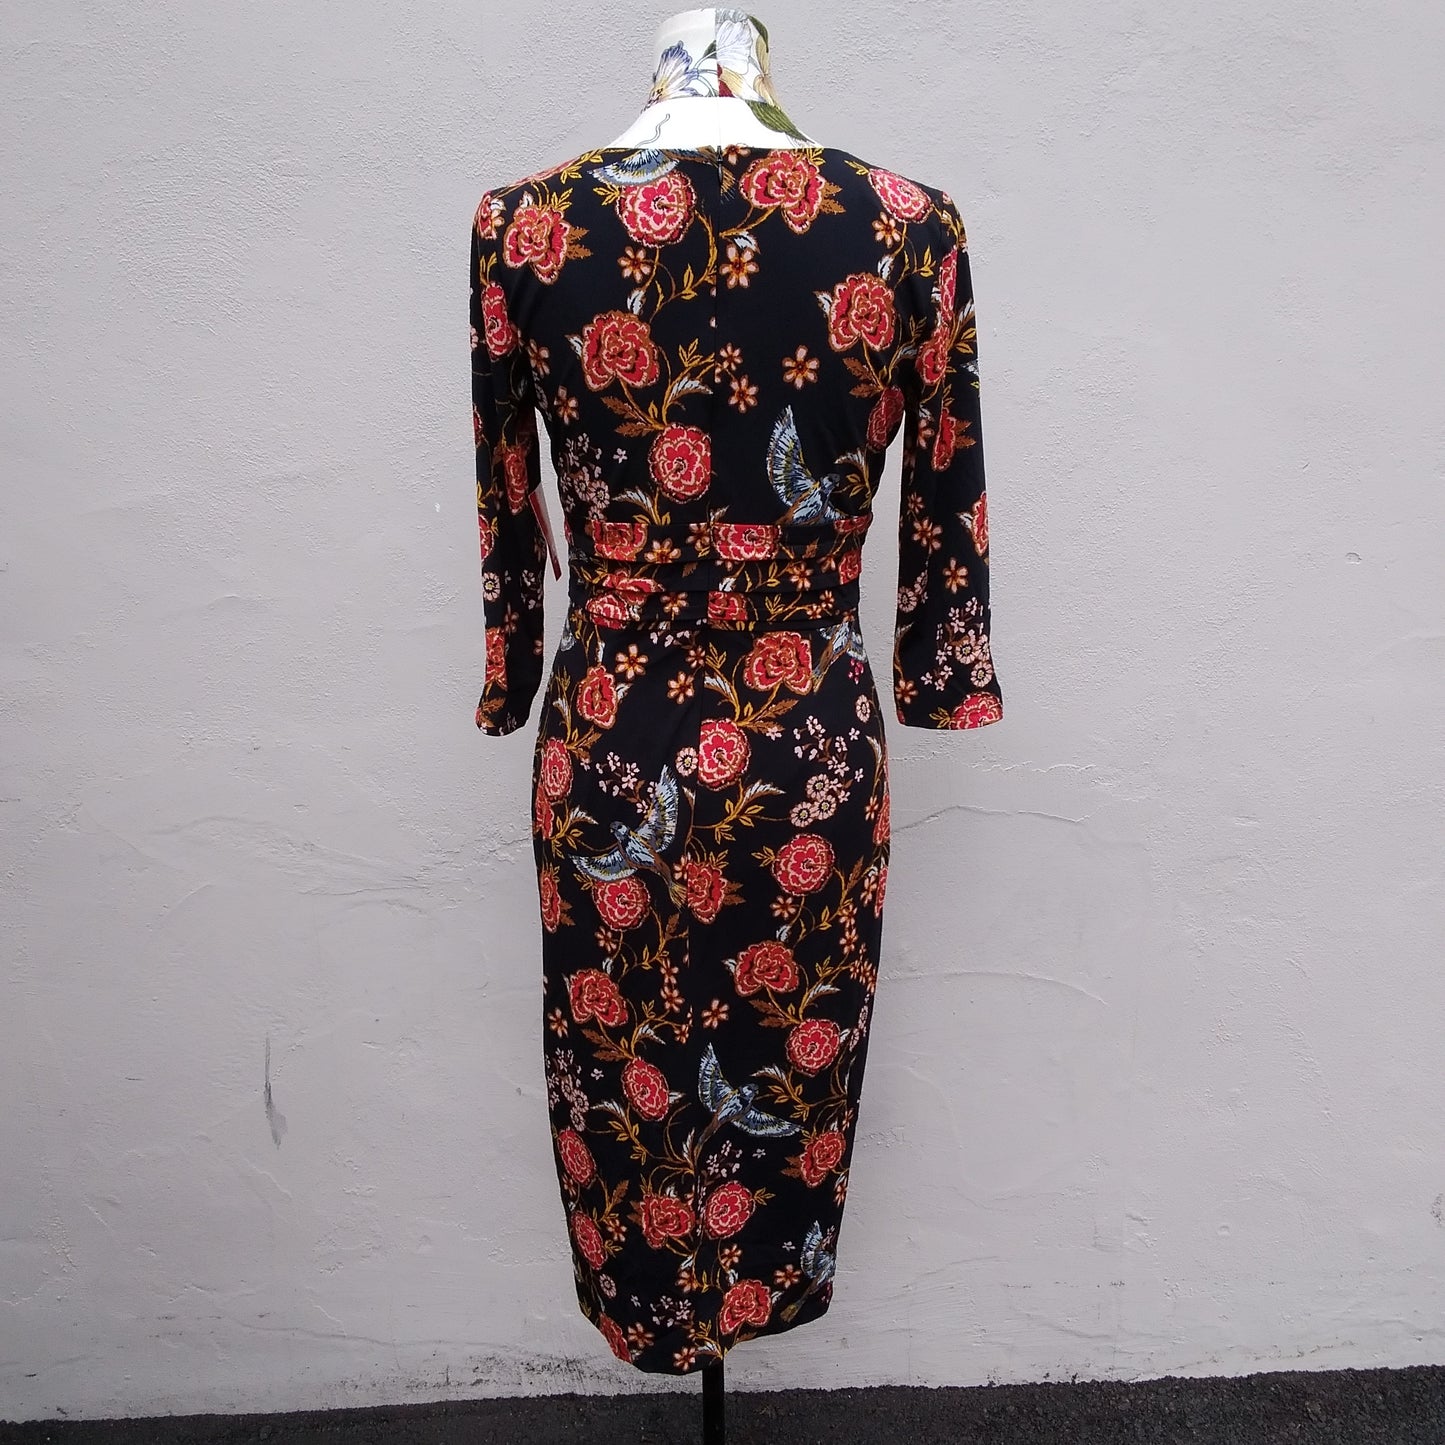 NWT - MELROSE black multicolored Floral 3/4 Sleeve Dress - 8